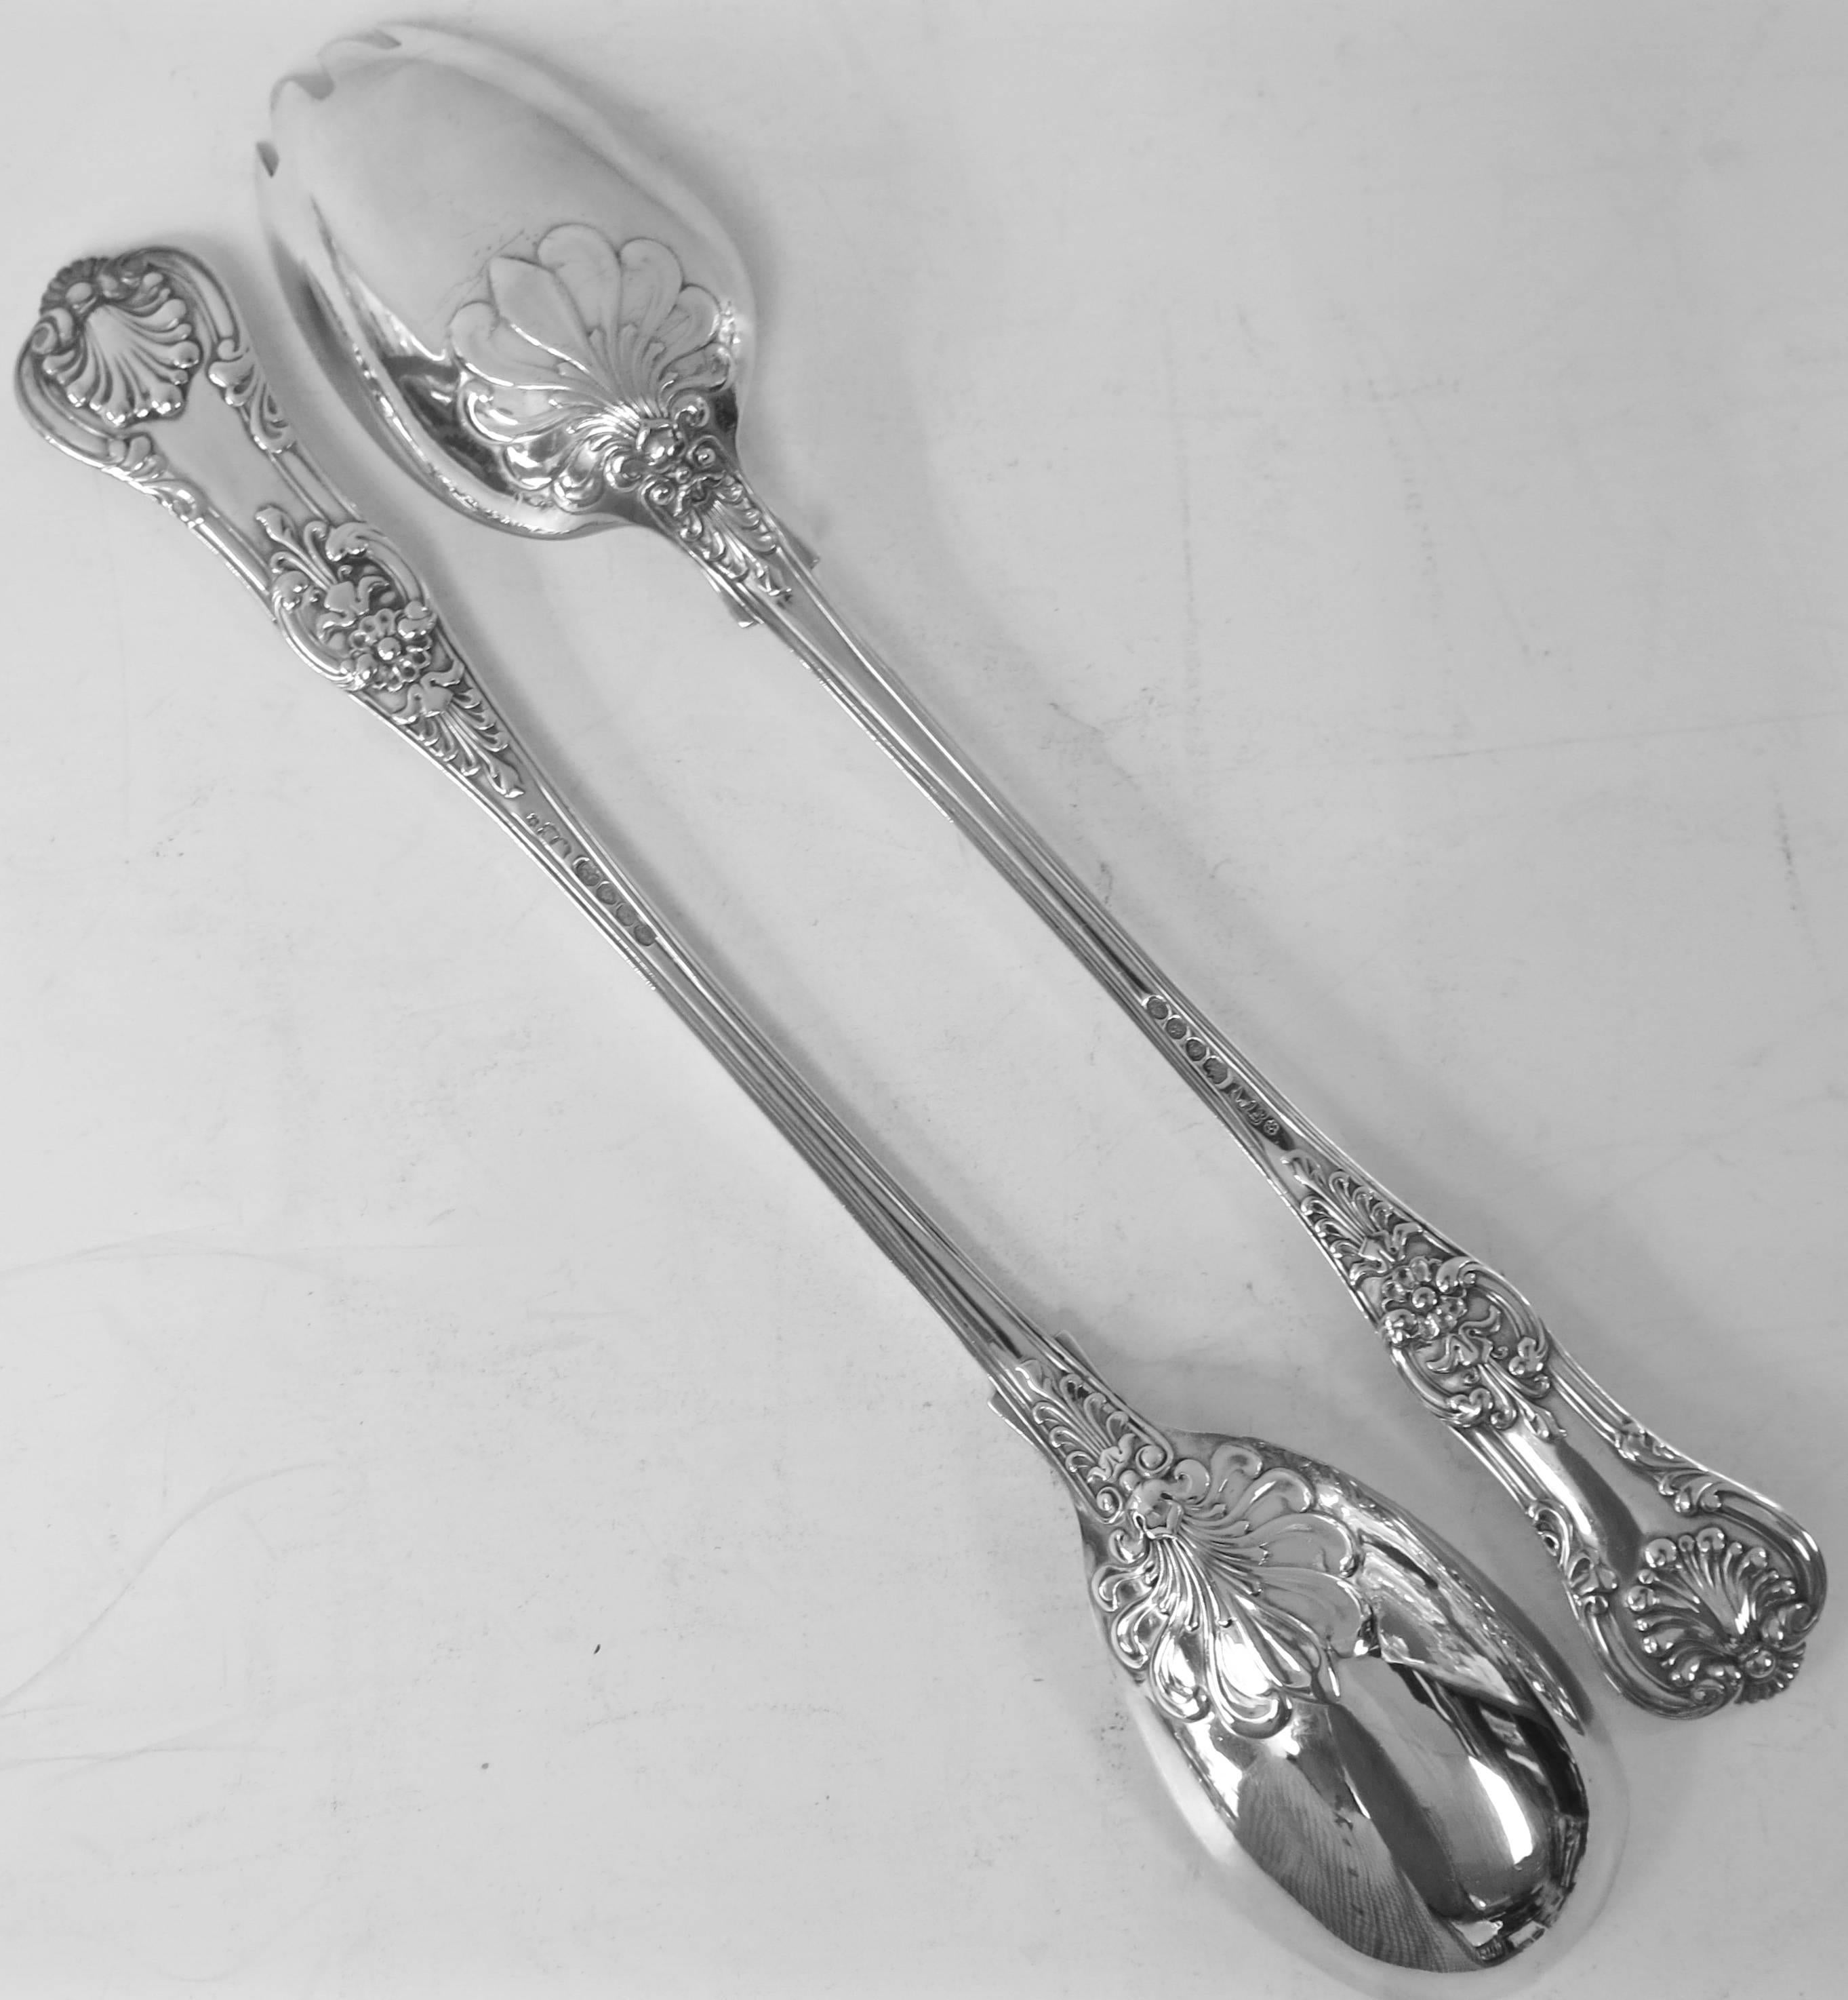 Exceptional quality pair of antique English, sterling silver Queens pattern salad servers made by William Eley In London, 1837. It's rare to find antique salad servers, and the size, style, quality, maker, period and condition of these only add to